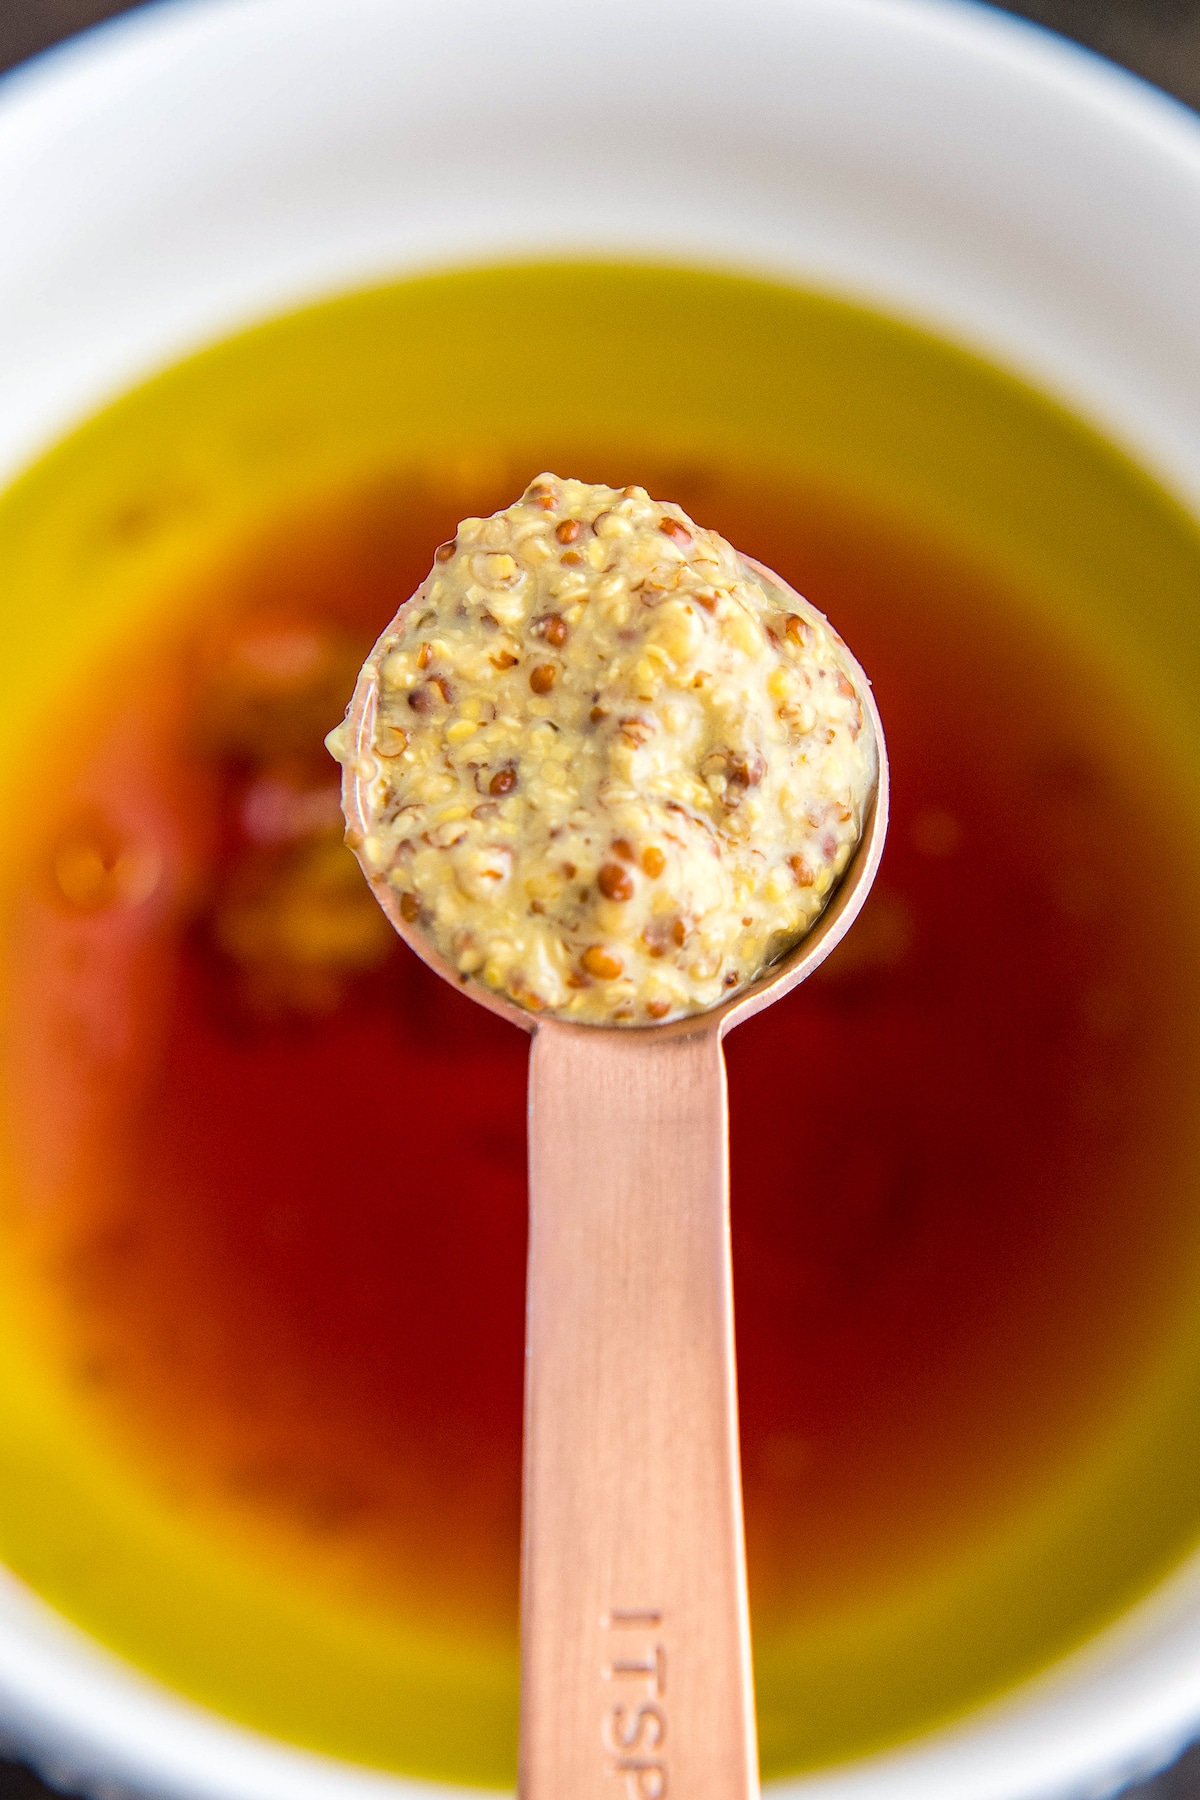 A spoonful of Dijon Mustard being added to a bowl.